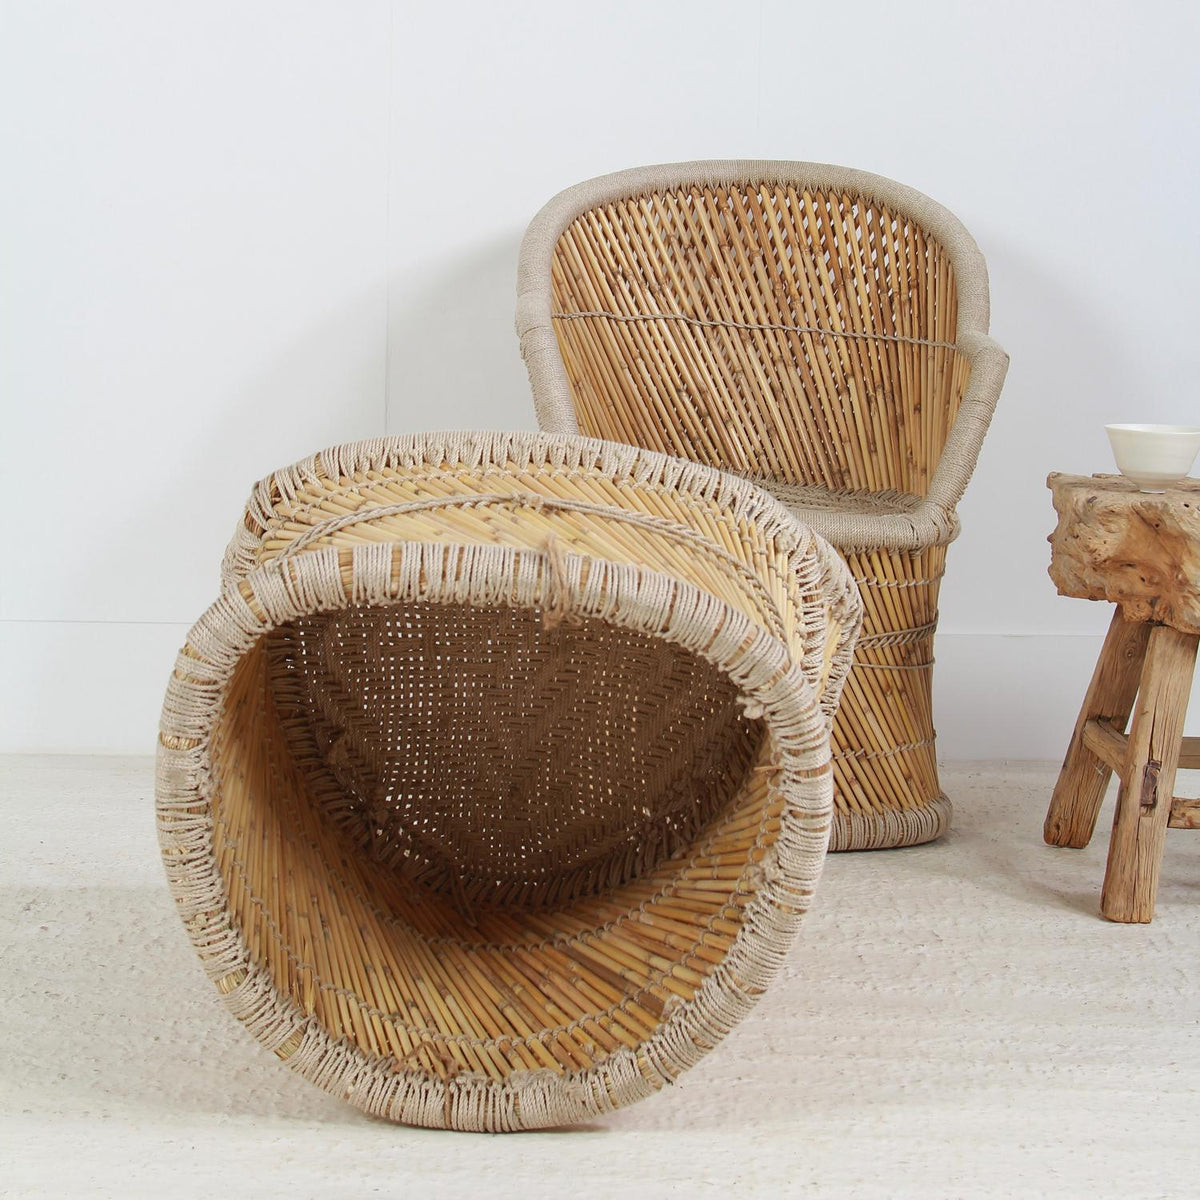 Pair of Natural Bamboo Chairs with Woven seats